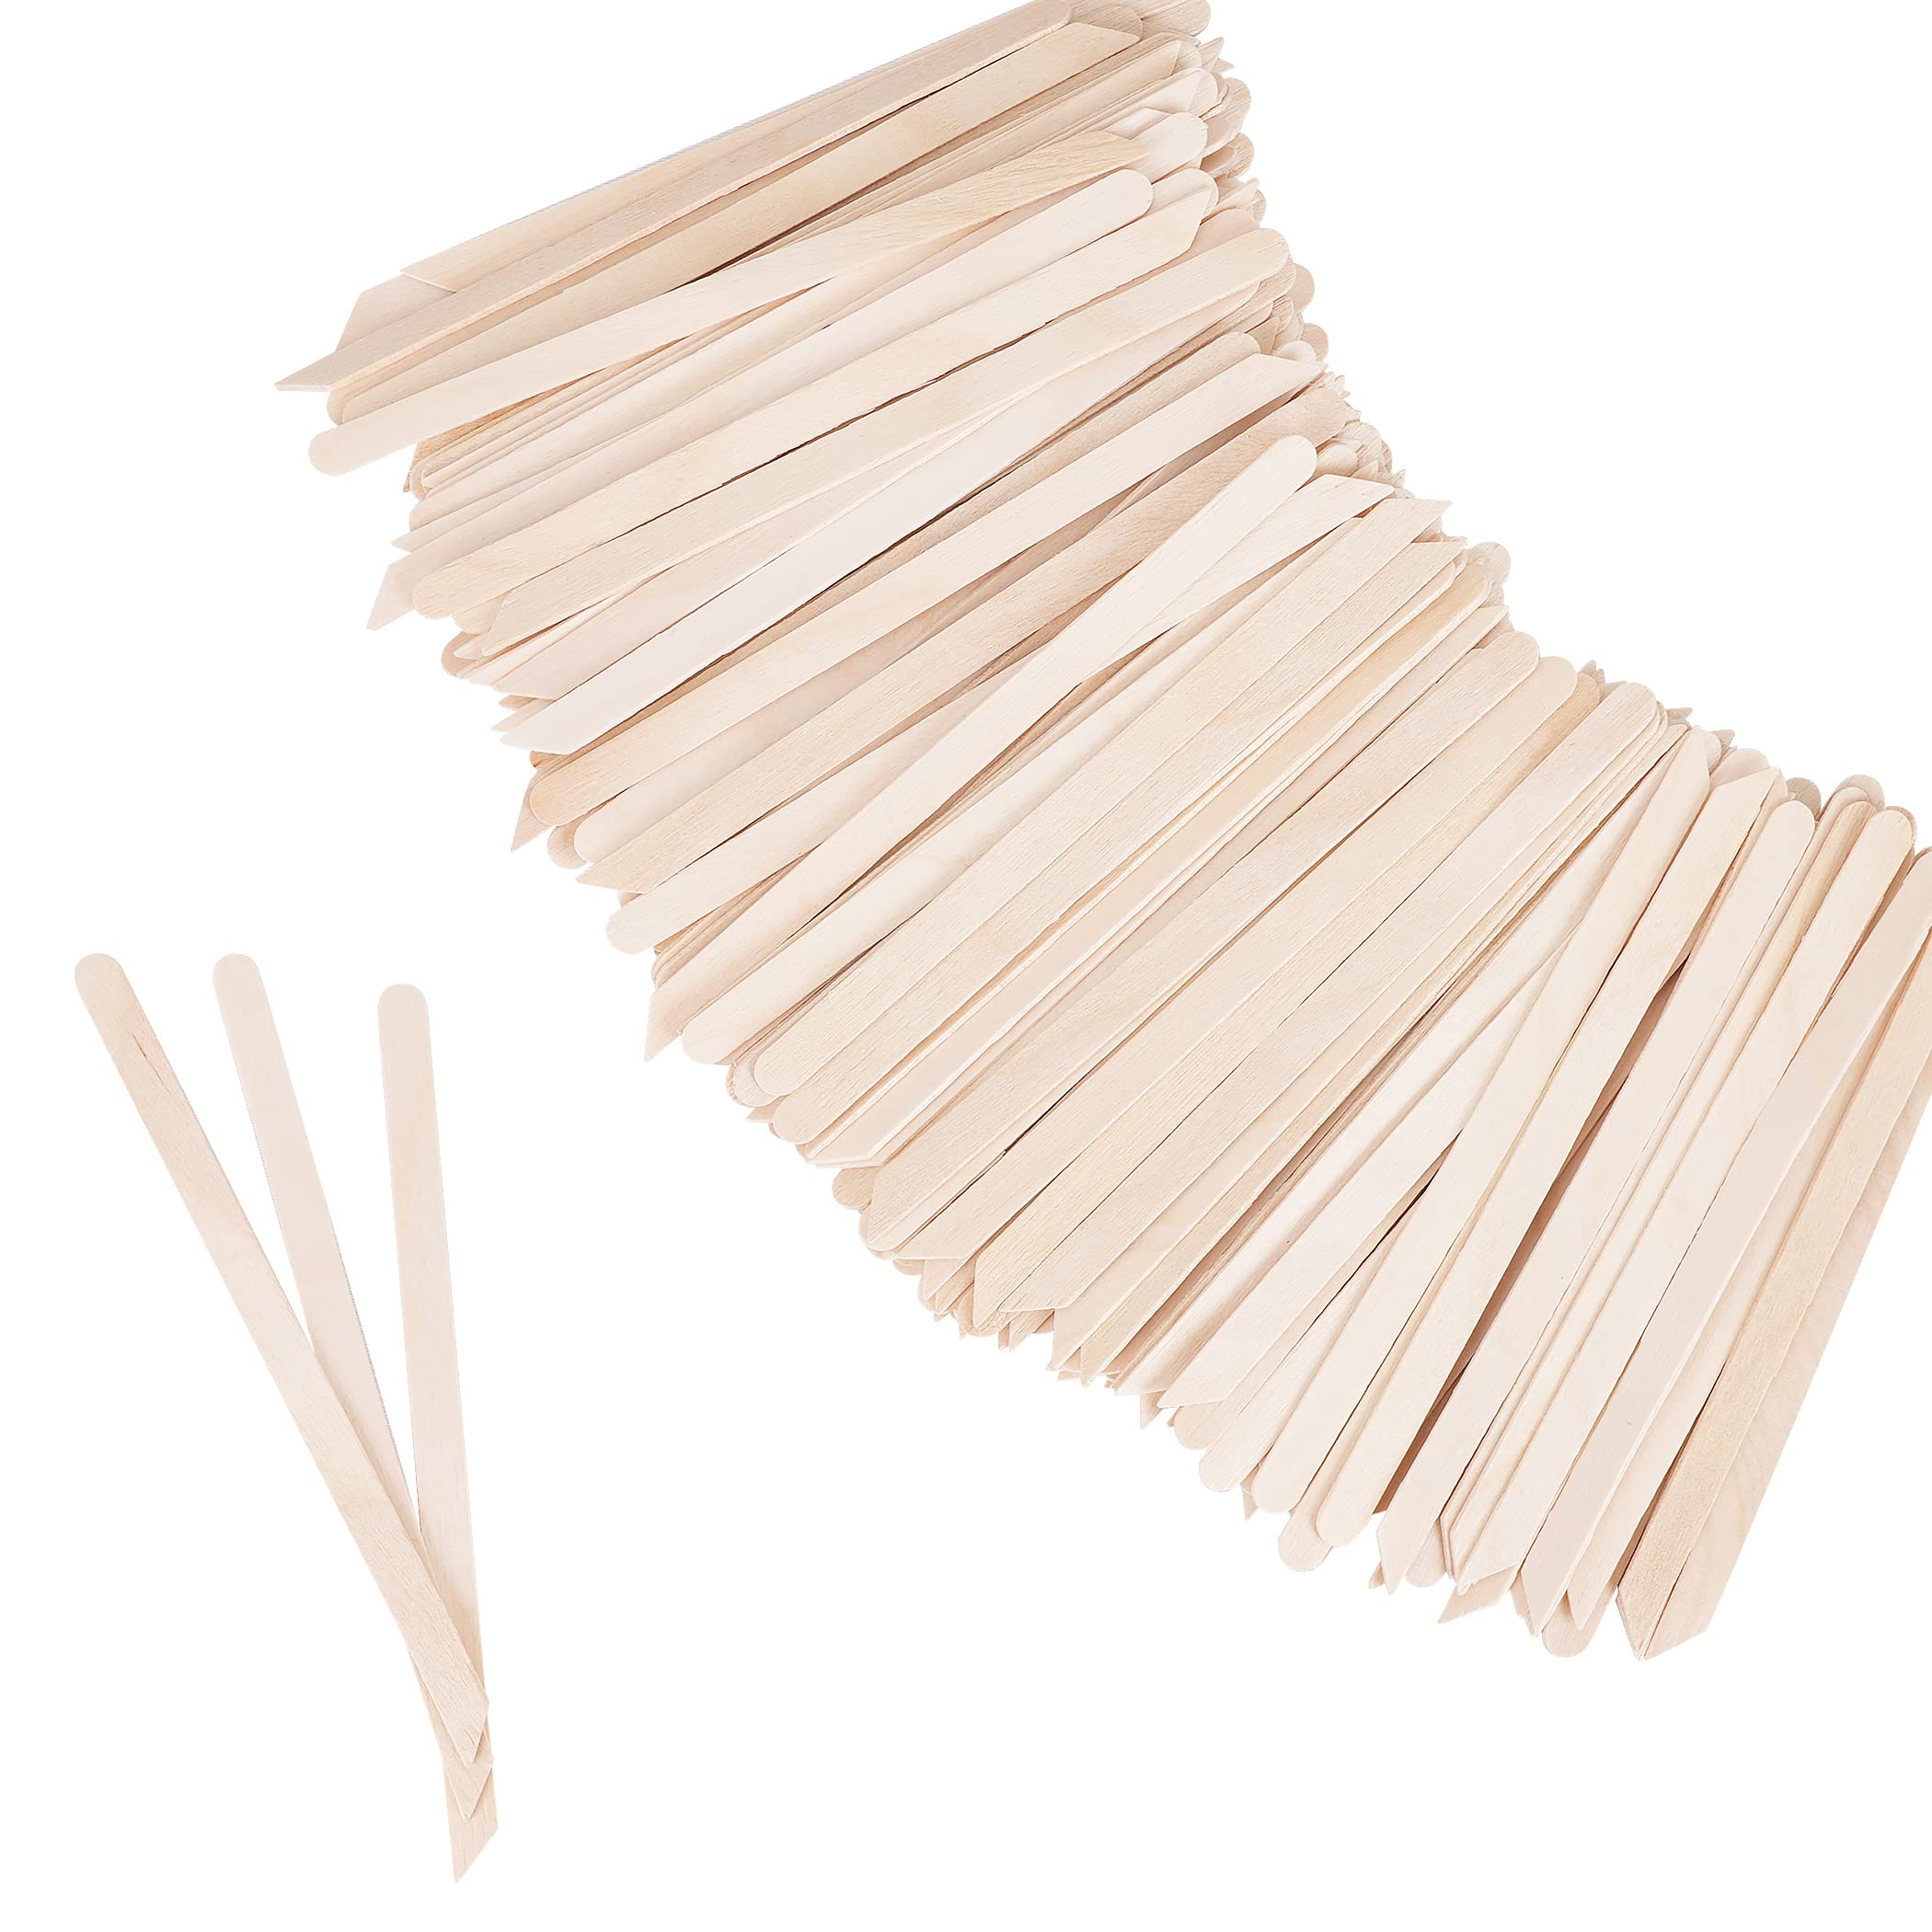  JoyJour Wooden Wax Sticks - Eyebrow, Lip, Nose Small Waxing  Applicator Sticks for Hair Removal and Smooth Skin, Round and Slanted (Pack  of 100) (Pack of 500) : Beauty & Personal Care